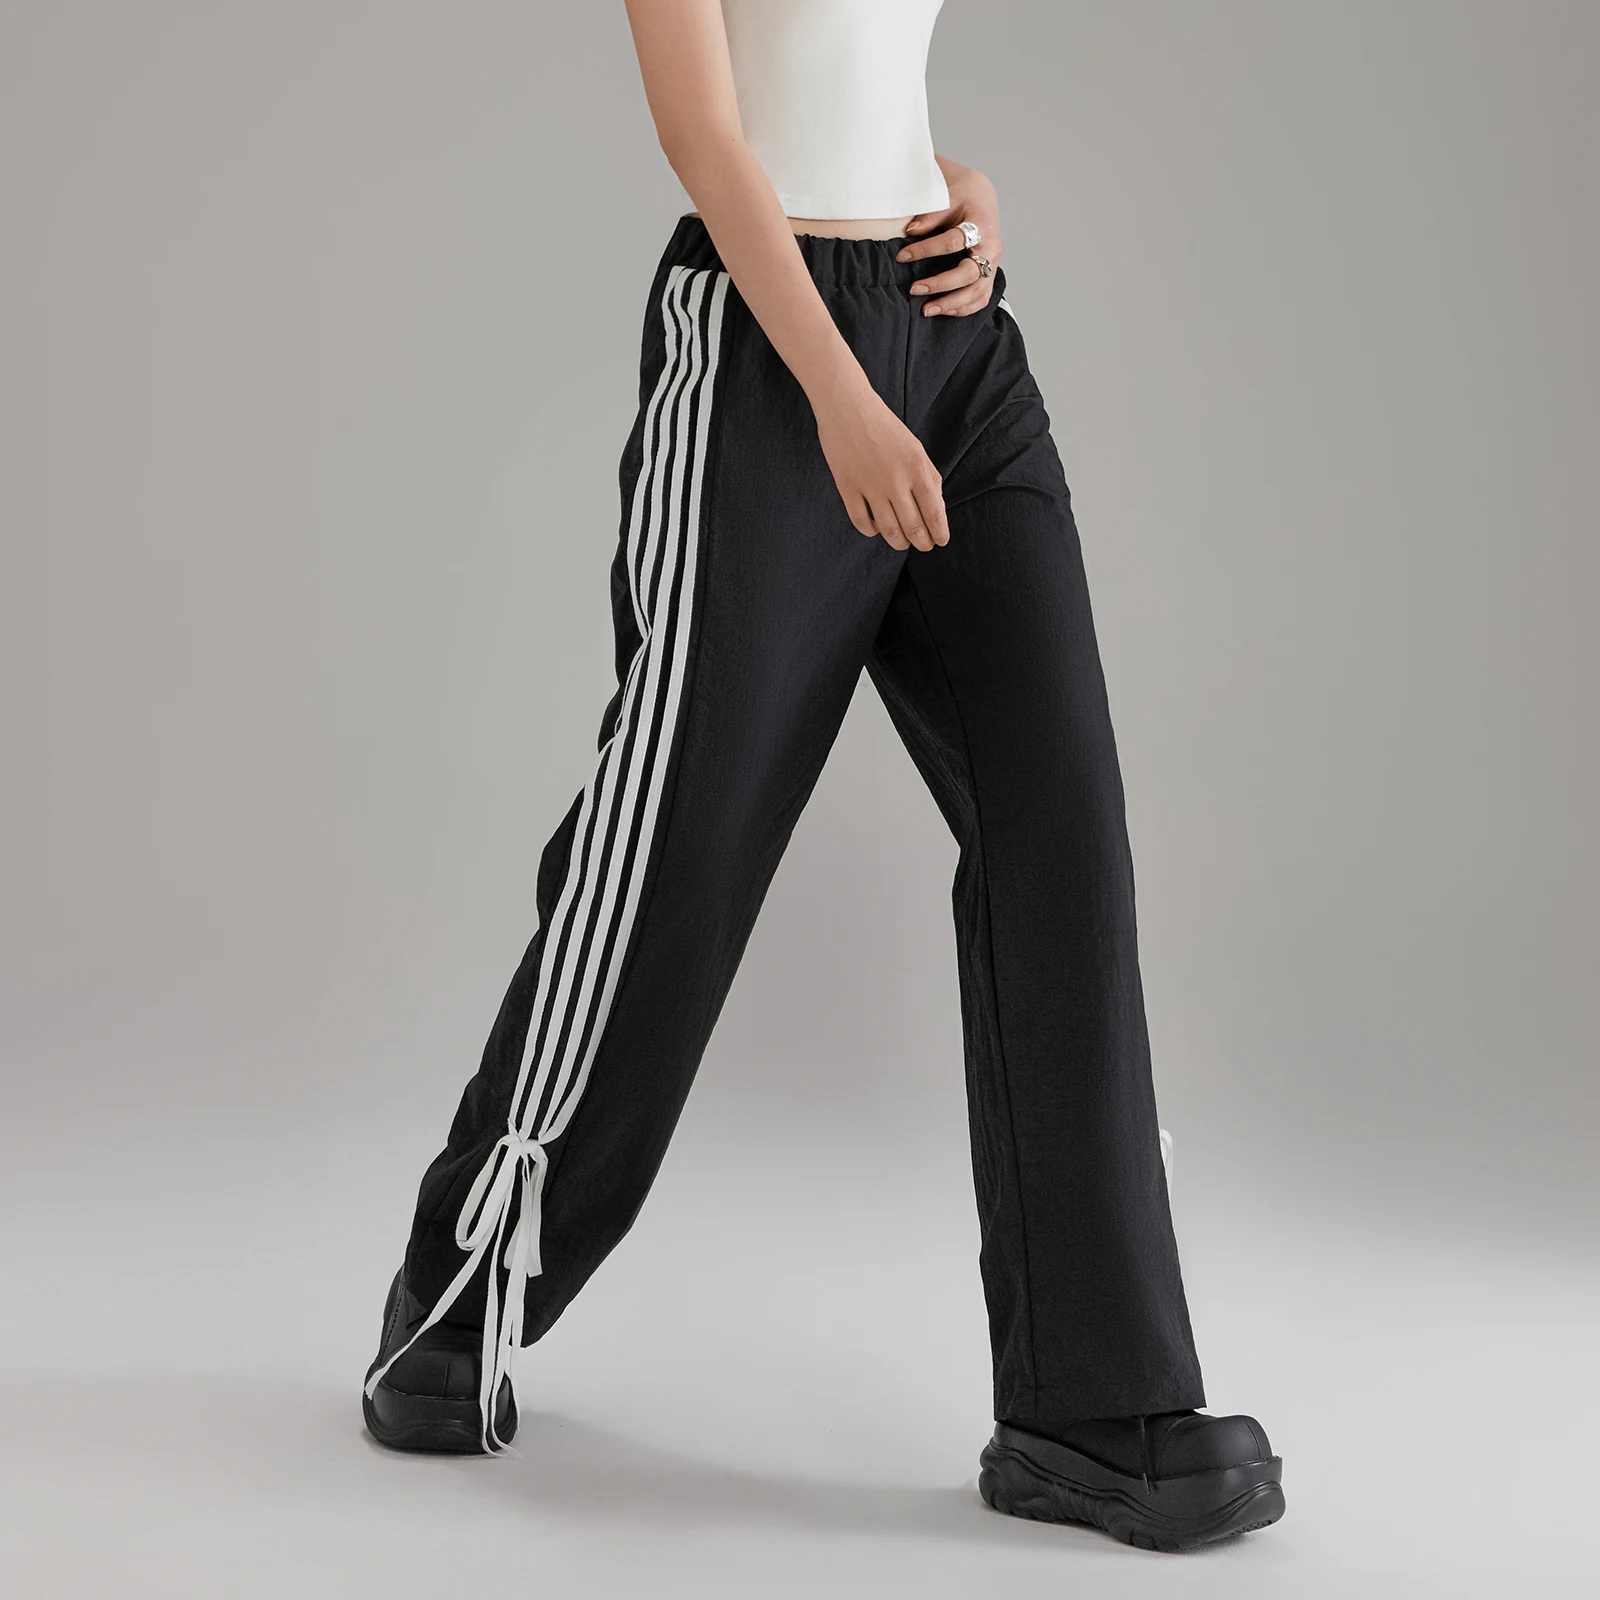 

Women's Y2K Vintage Loose Fit Spring Summer Sports Long Pants Black Elastic Low Waist Bow-knot Tied Side Striped Jogger Trousers